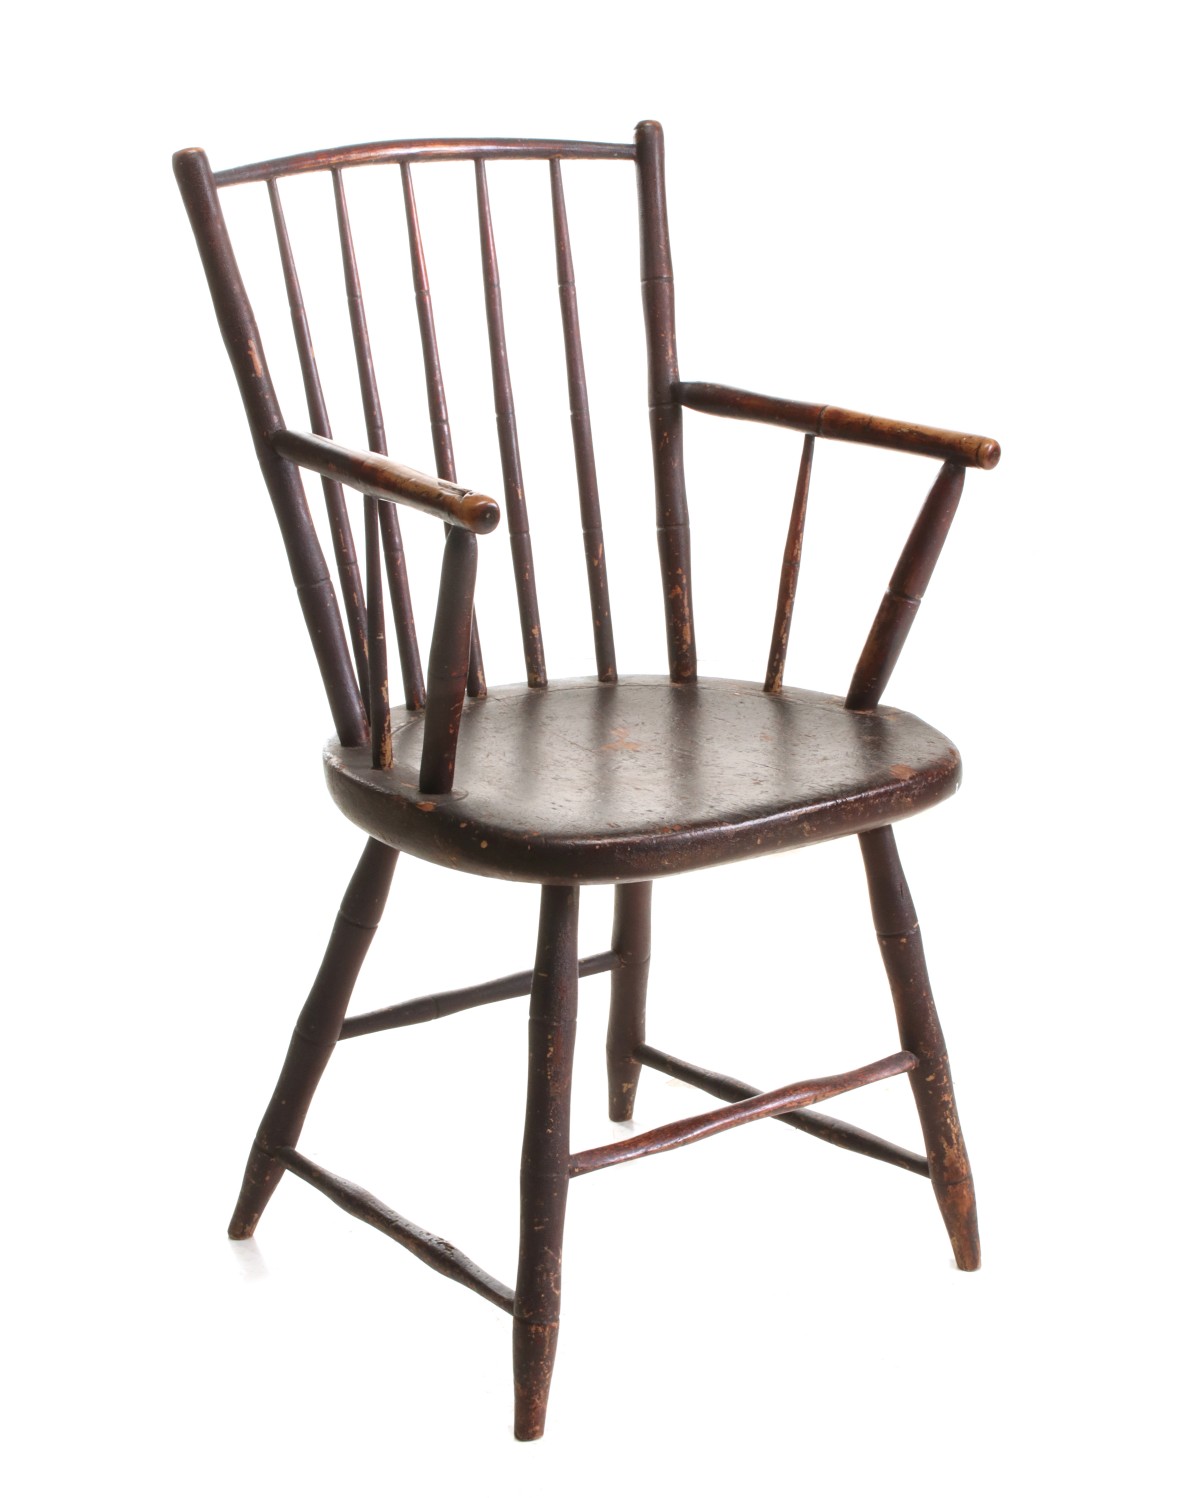 A ROD BACK WINDSOR ARM CHAIR IN OLD RED PAINT C. 1800